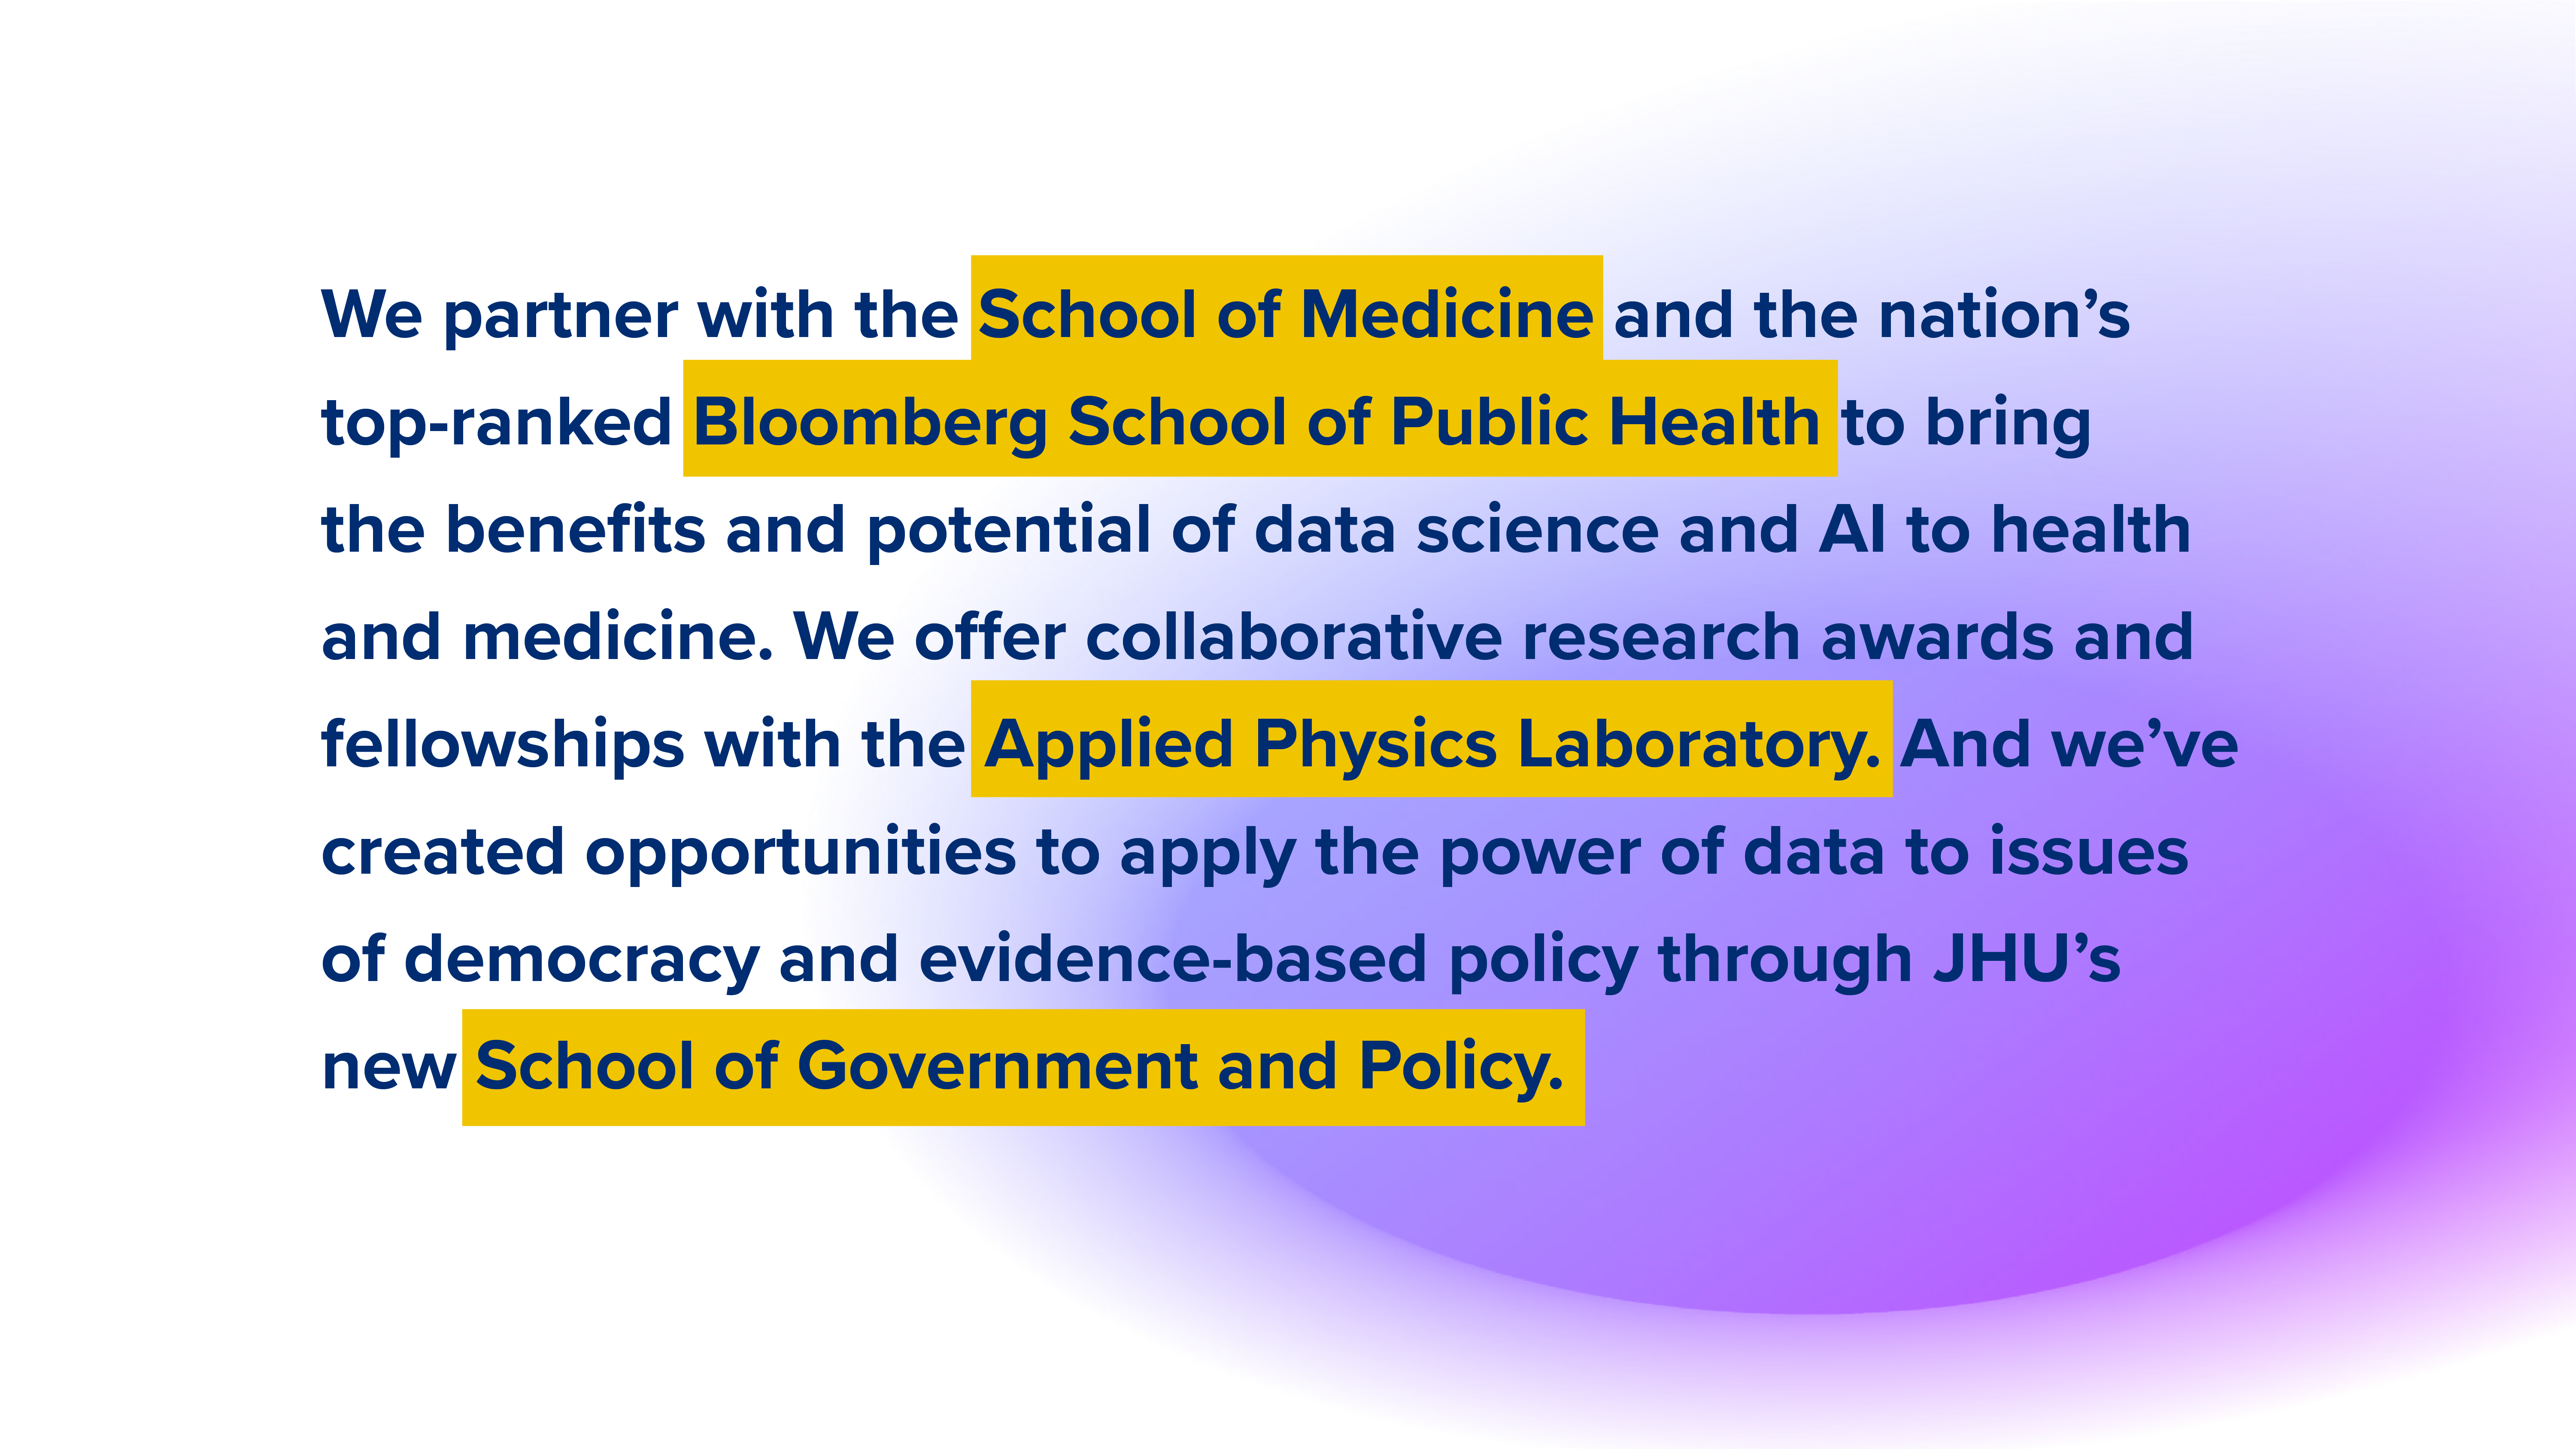 We partner with the School of Medicine and the nation’s top-ranked Bloomberg School of Public Health to bring the benefits and potential of data science and AI to health and medicine. We offer collaborative research awards and fellowships with the Applied Physics Laboratory. And we’ve created opportunities to apply the power of data to issues of democracy and evidence-based policy through JHU’s new School of Government and Policy.